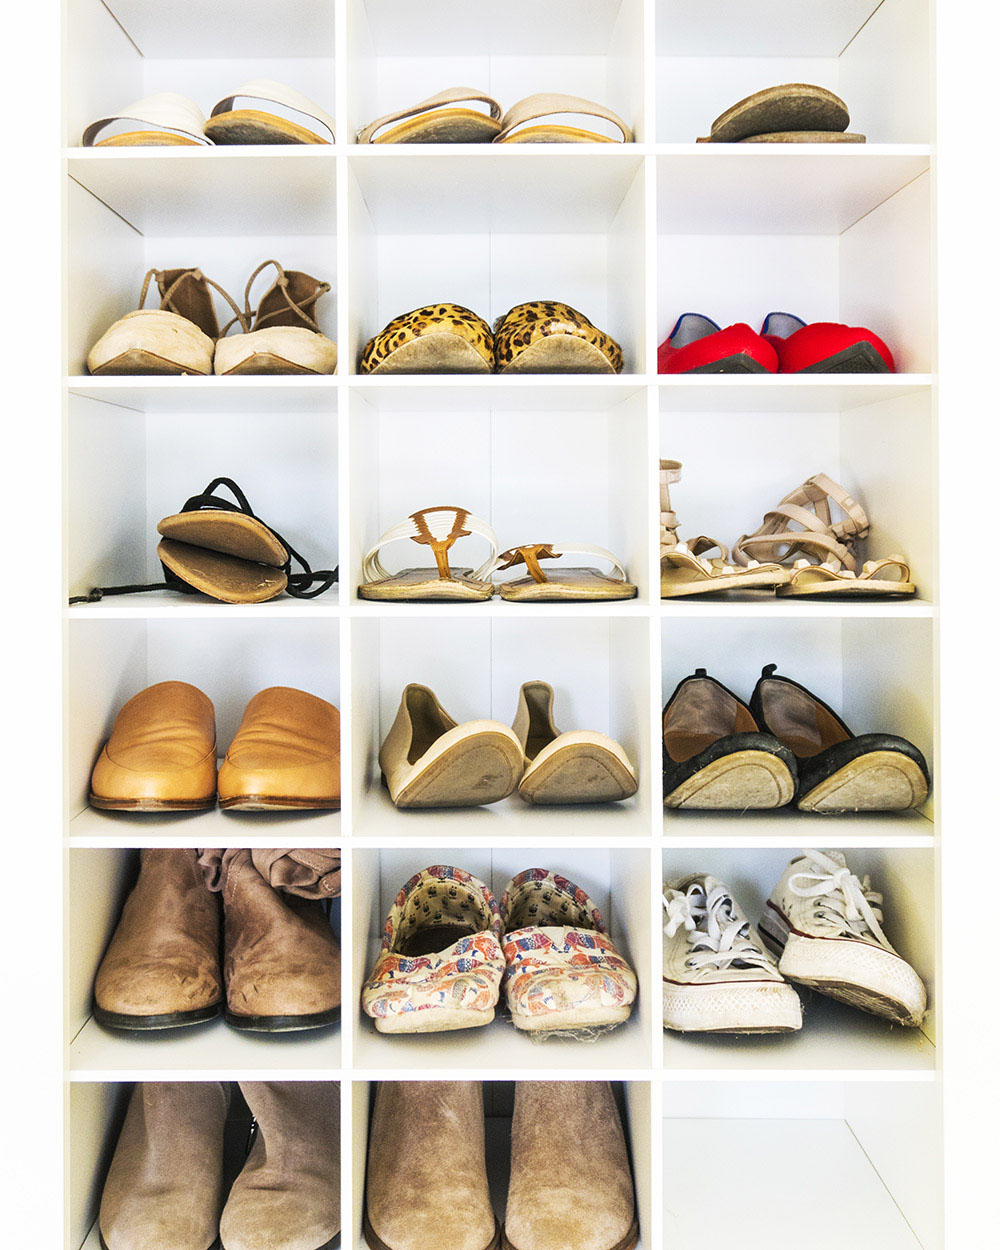 Shoes organized in wall shelves 